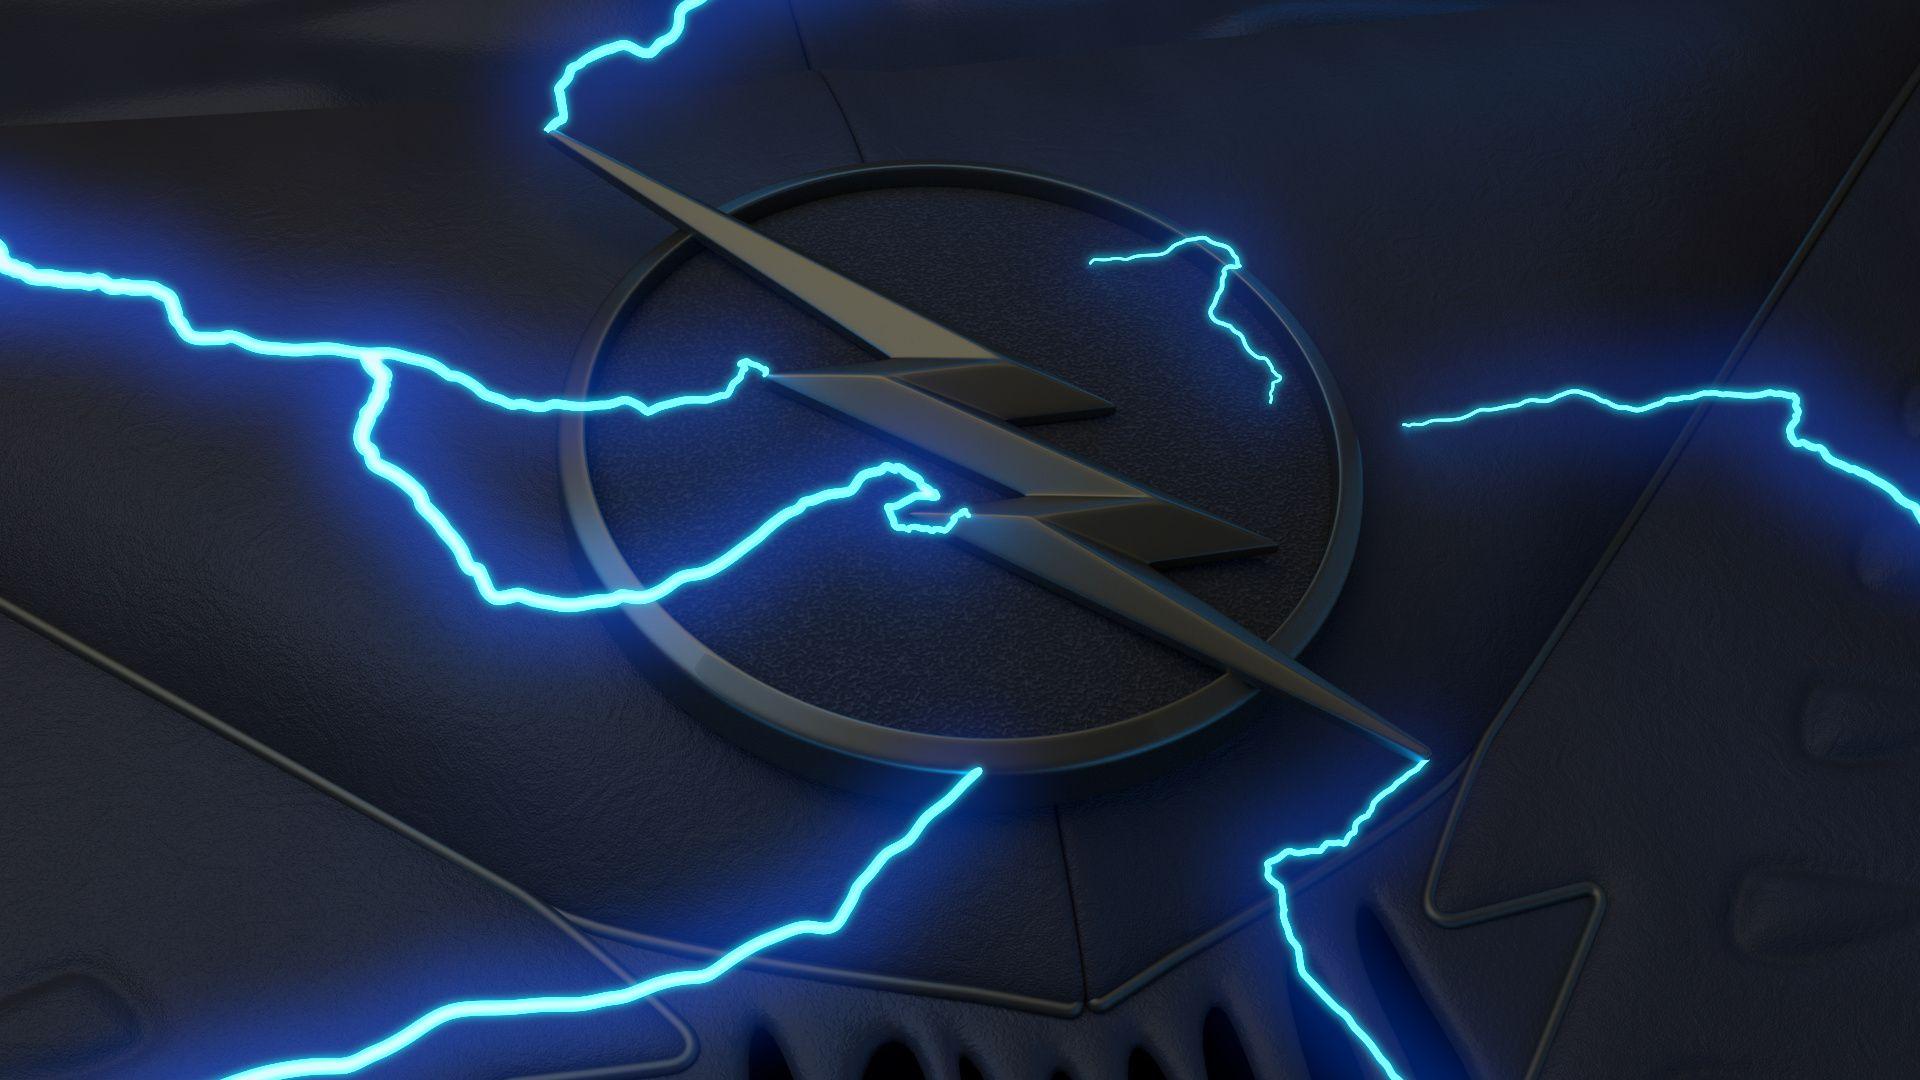 Electrified 3D Zoom wallpaper [1080p] more sizes and another style